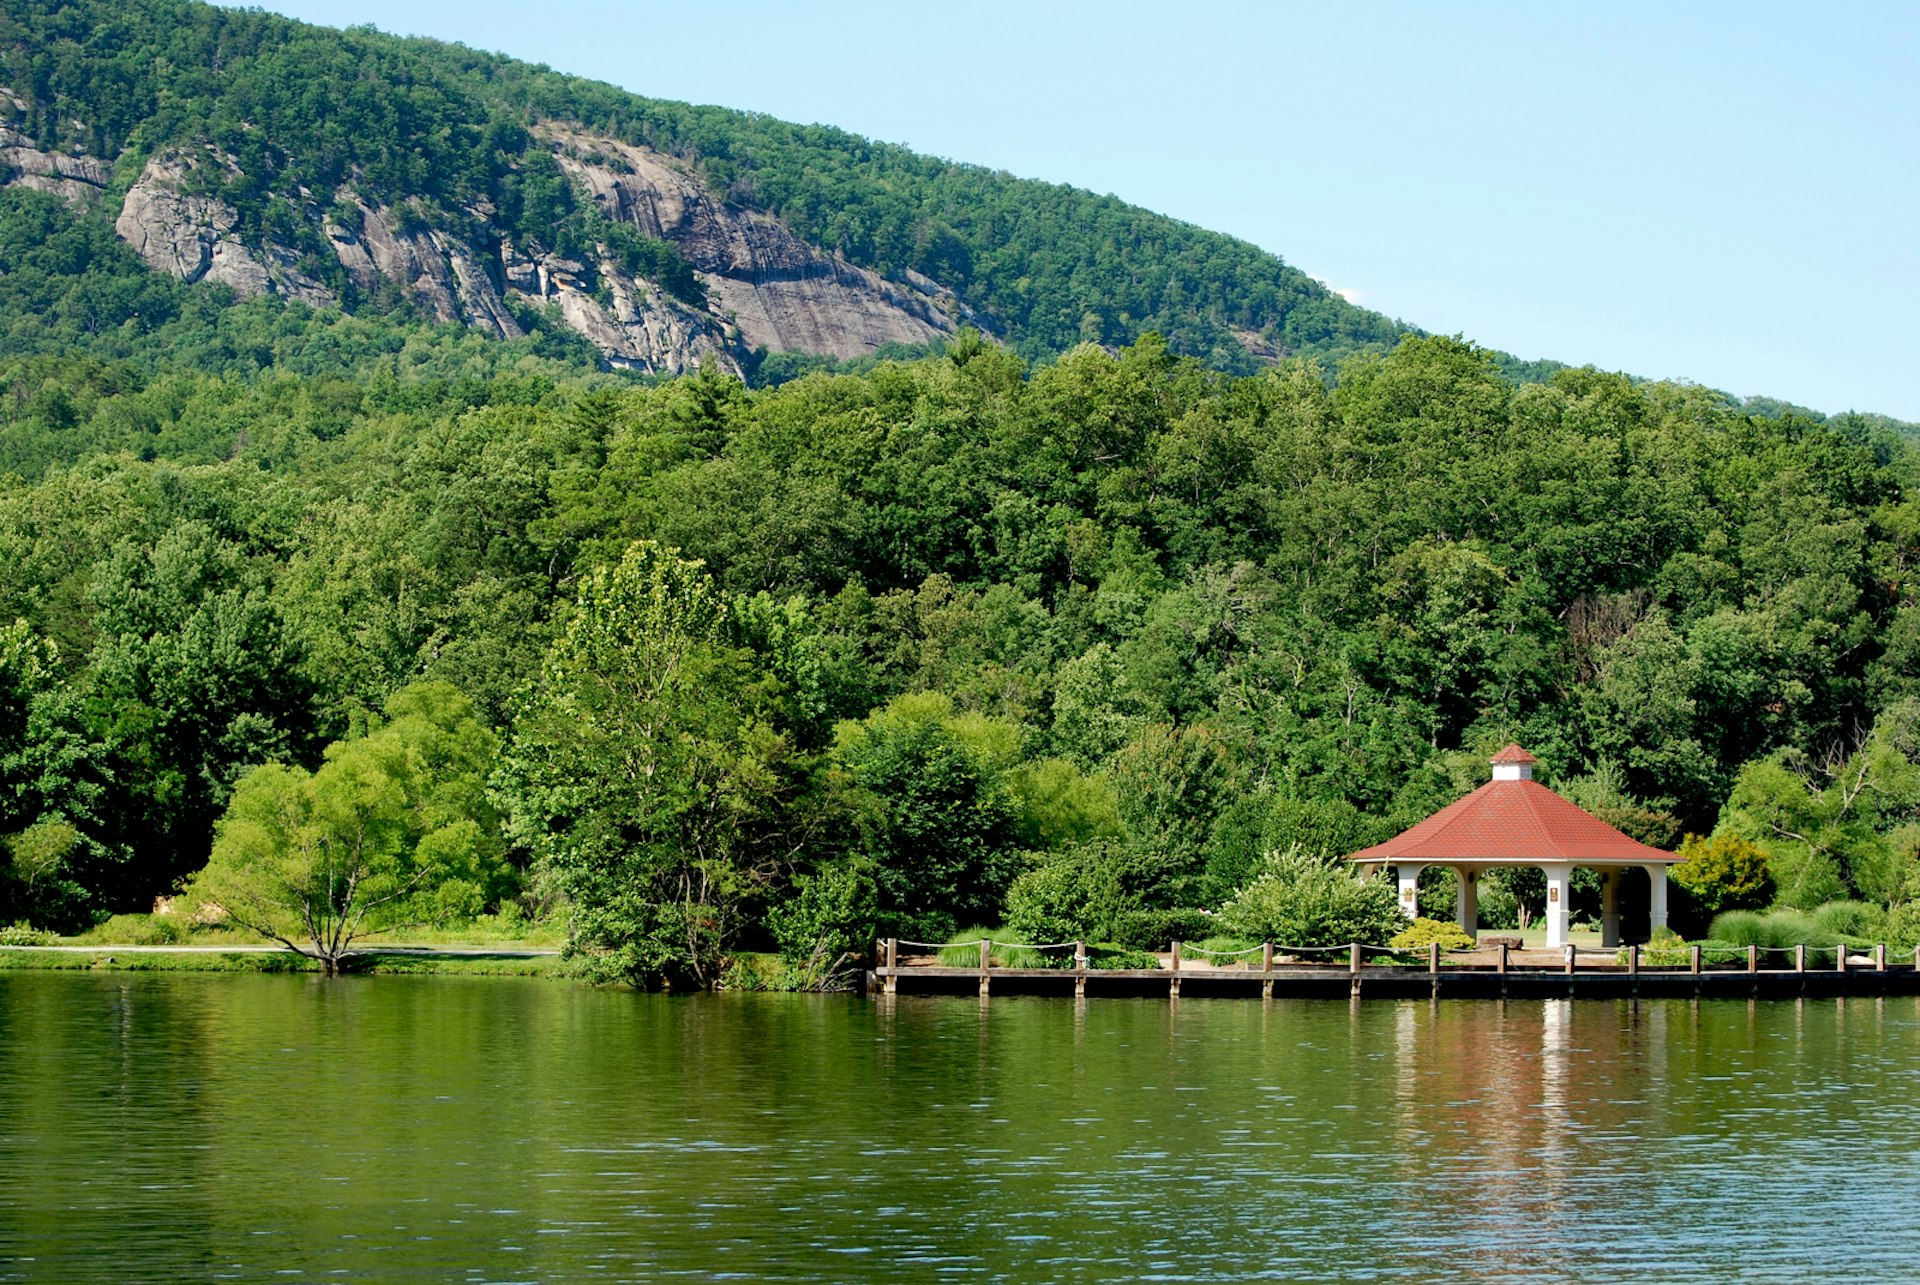 A lake and a small roofed structure, with green trees and a mountain in the background; summer trips in the Southern US